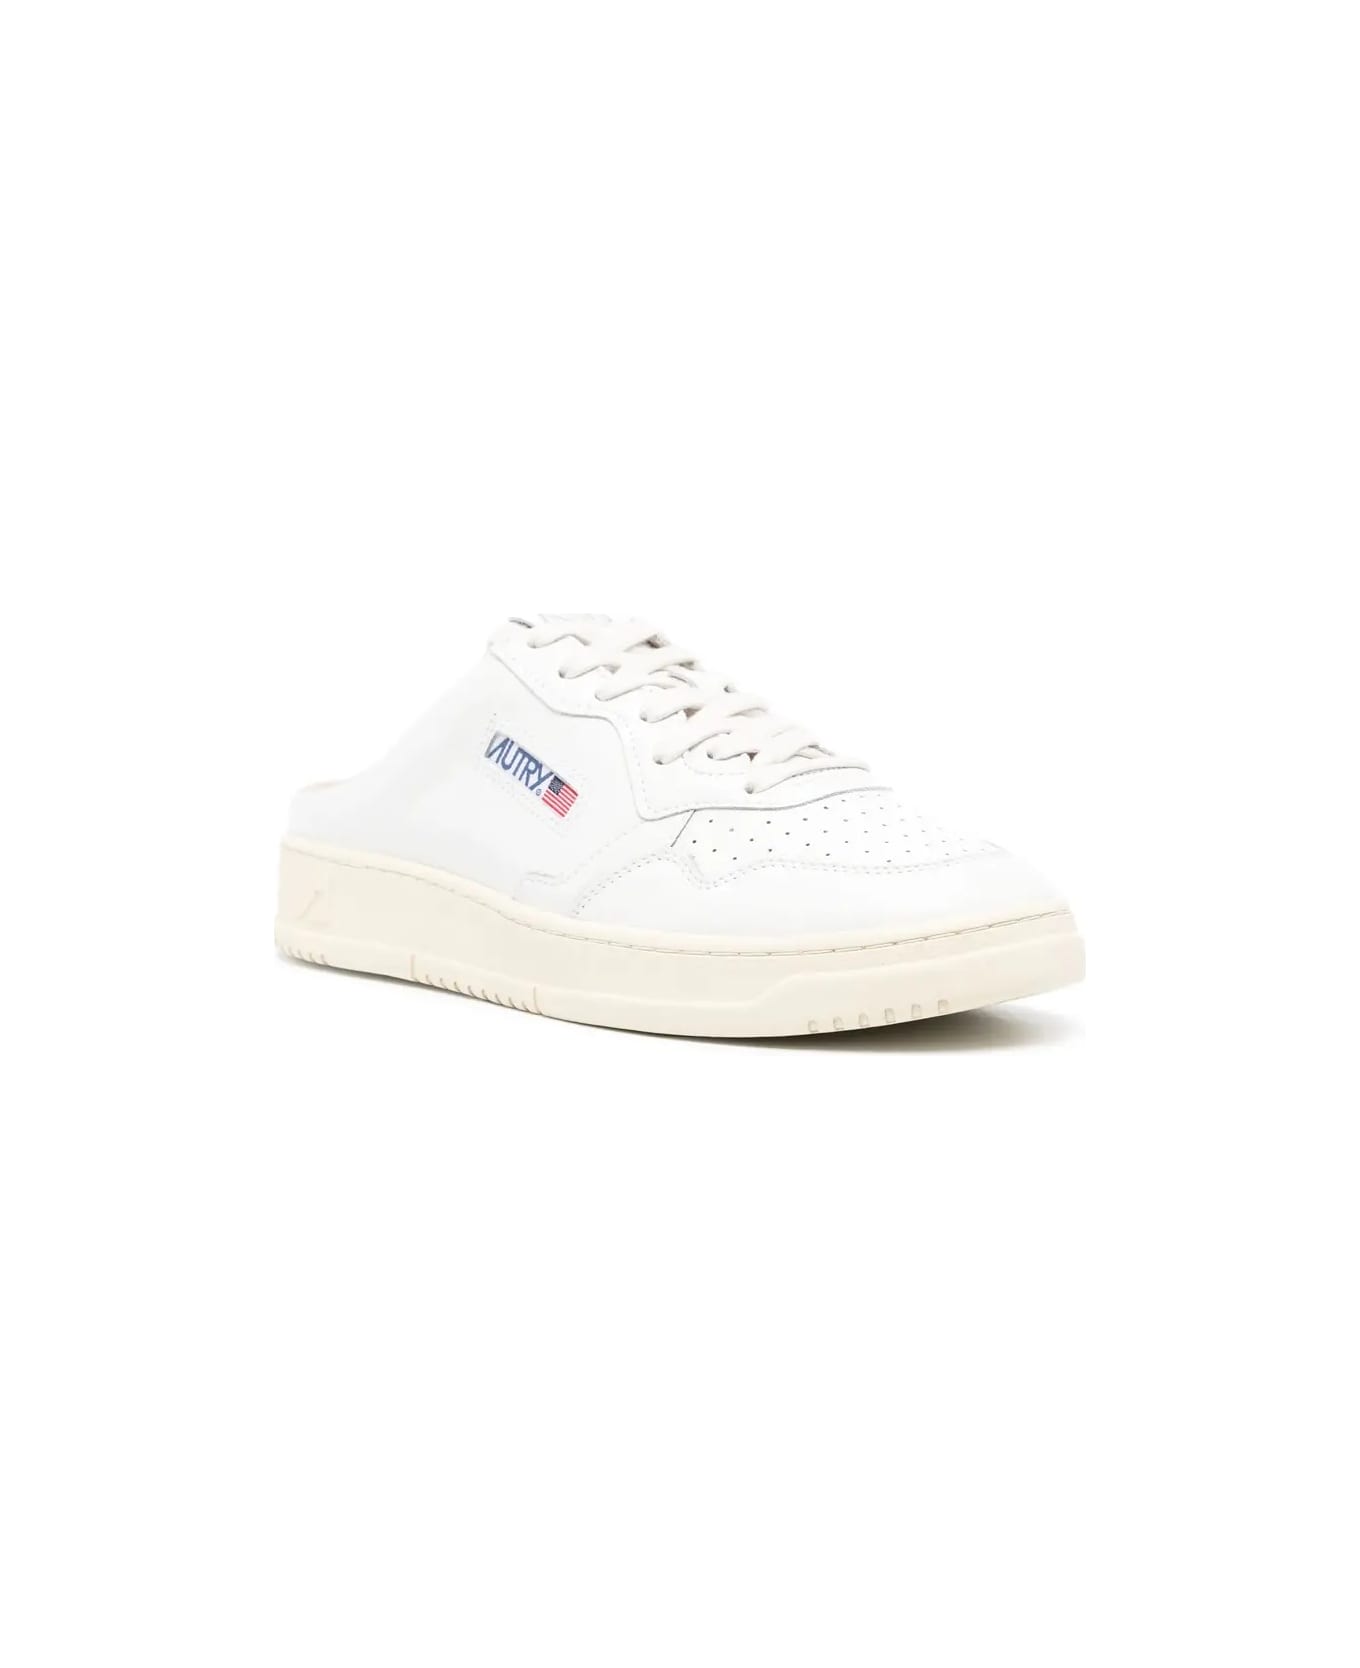 Autry White Medalist Mule Sneakers - White